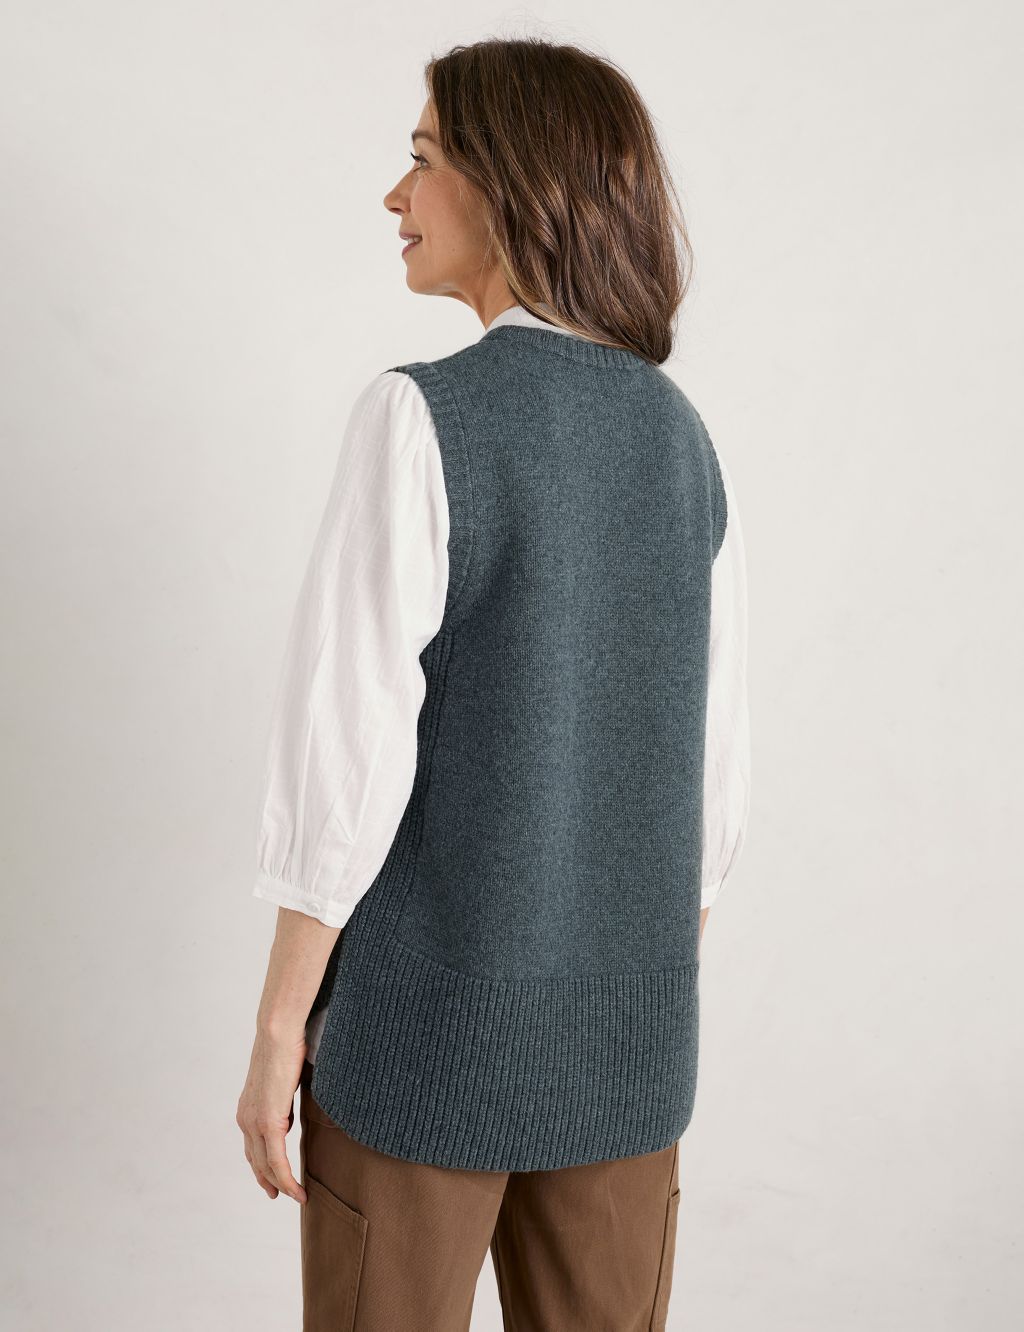 Merino Wool Rich Crew Neck Knitted Top image 4